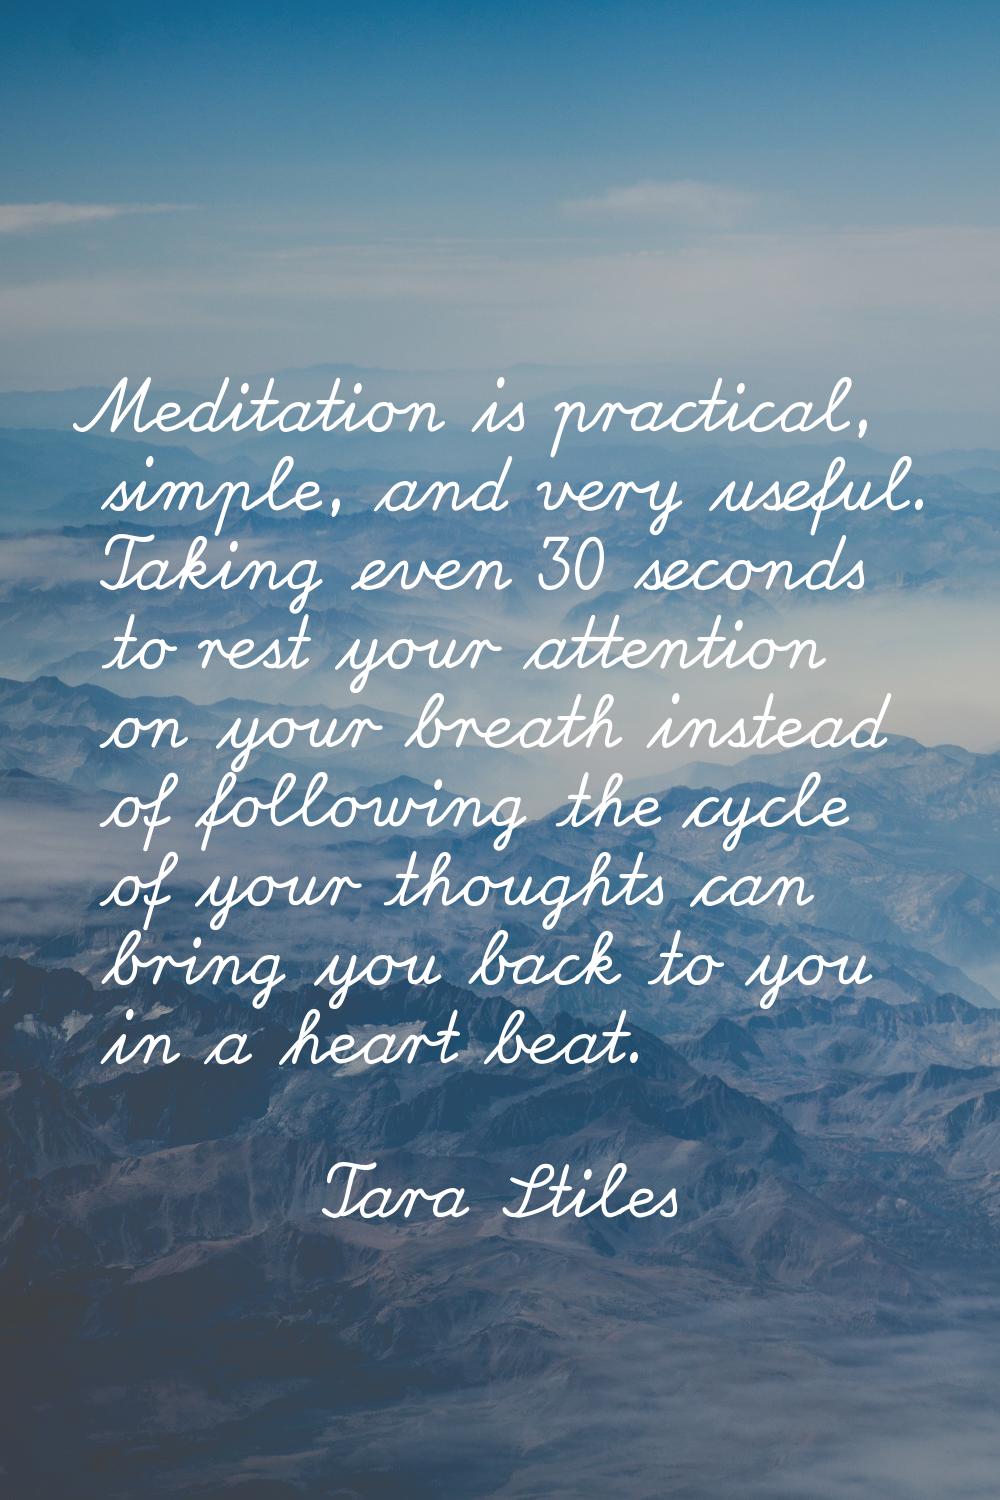 Meditation is practical, simple, and very useful. Taking even 30 seconds to rest your attention on 